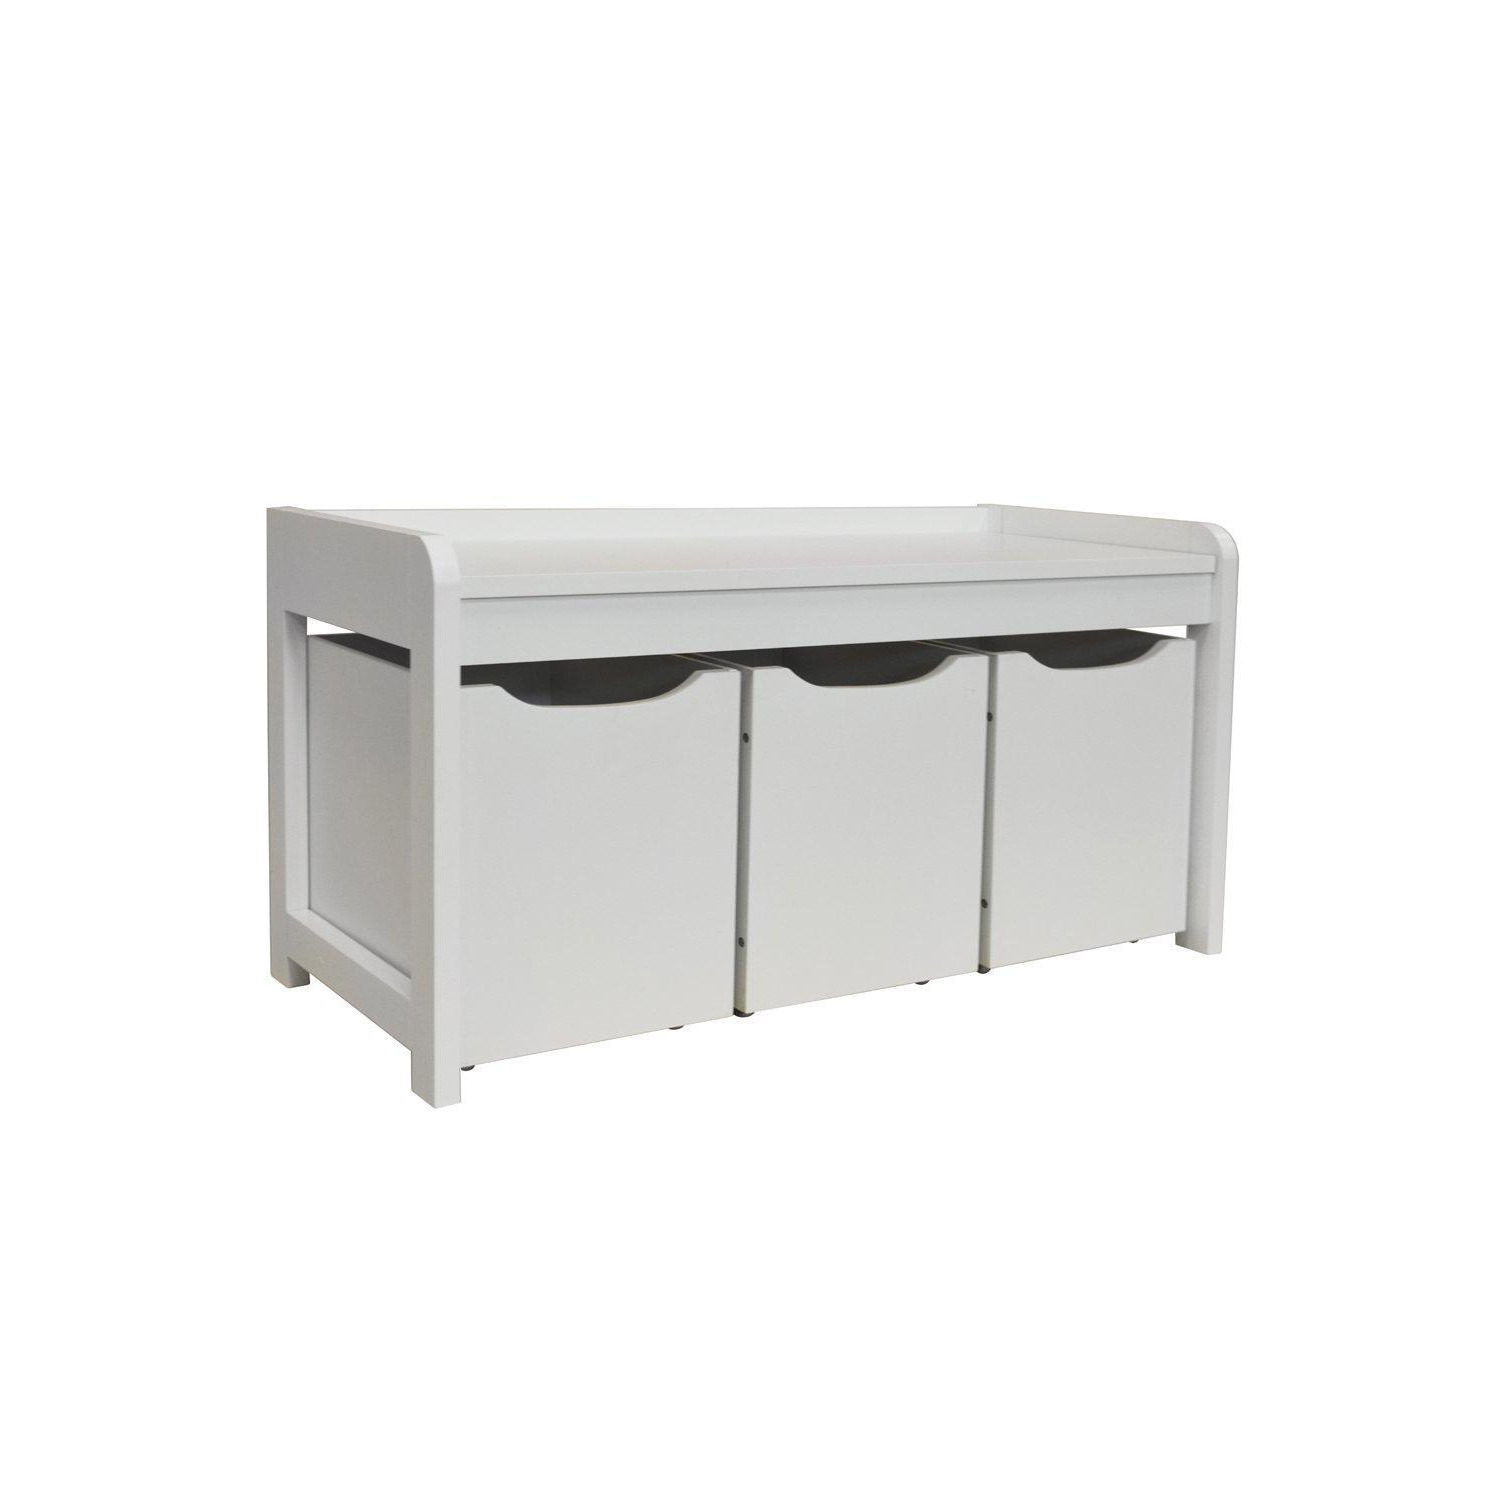 'Newton' - Hallway  Shoe  Toy  Bedroom Storage Bench With 3 Drawers - White - image 1